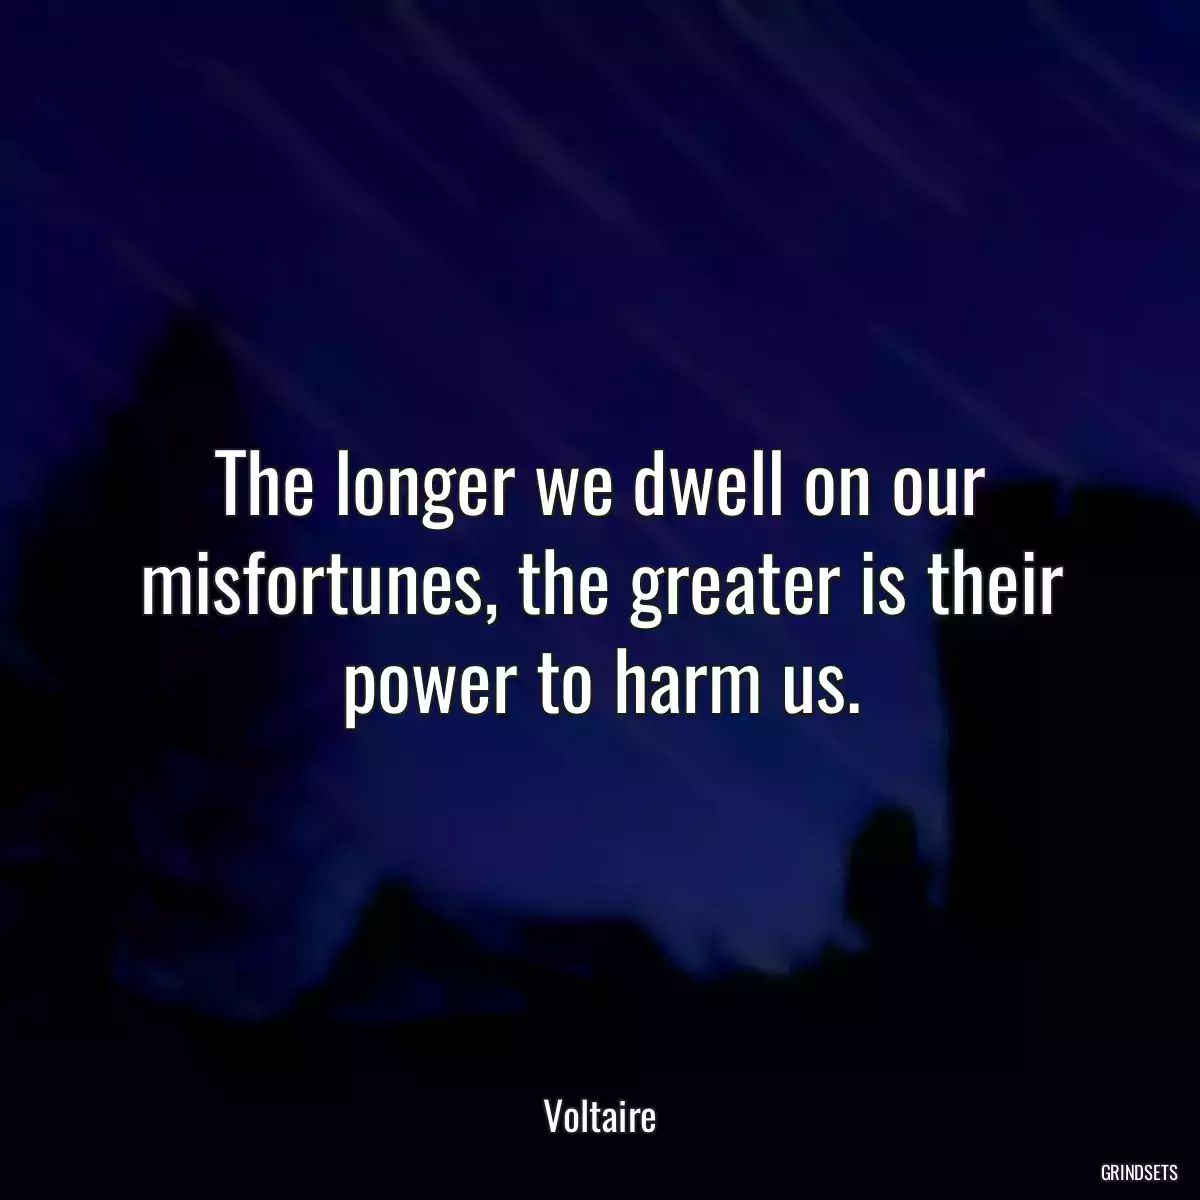 The longer we dwell on our misfortunes, the greater is their power to harm us.